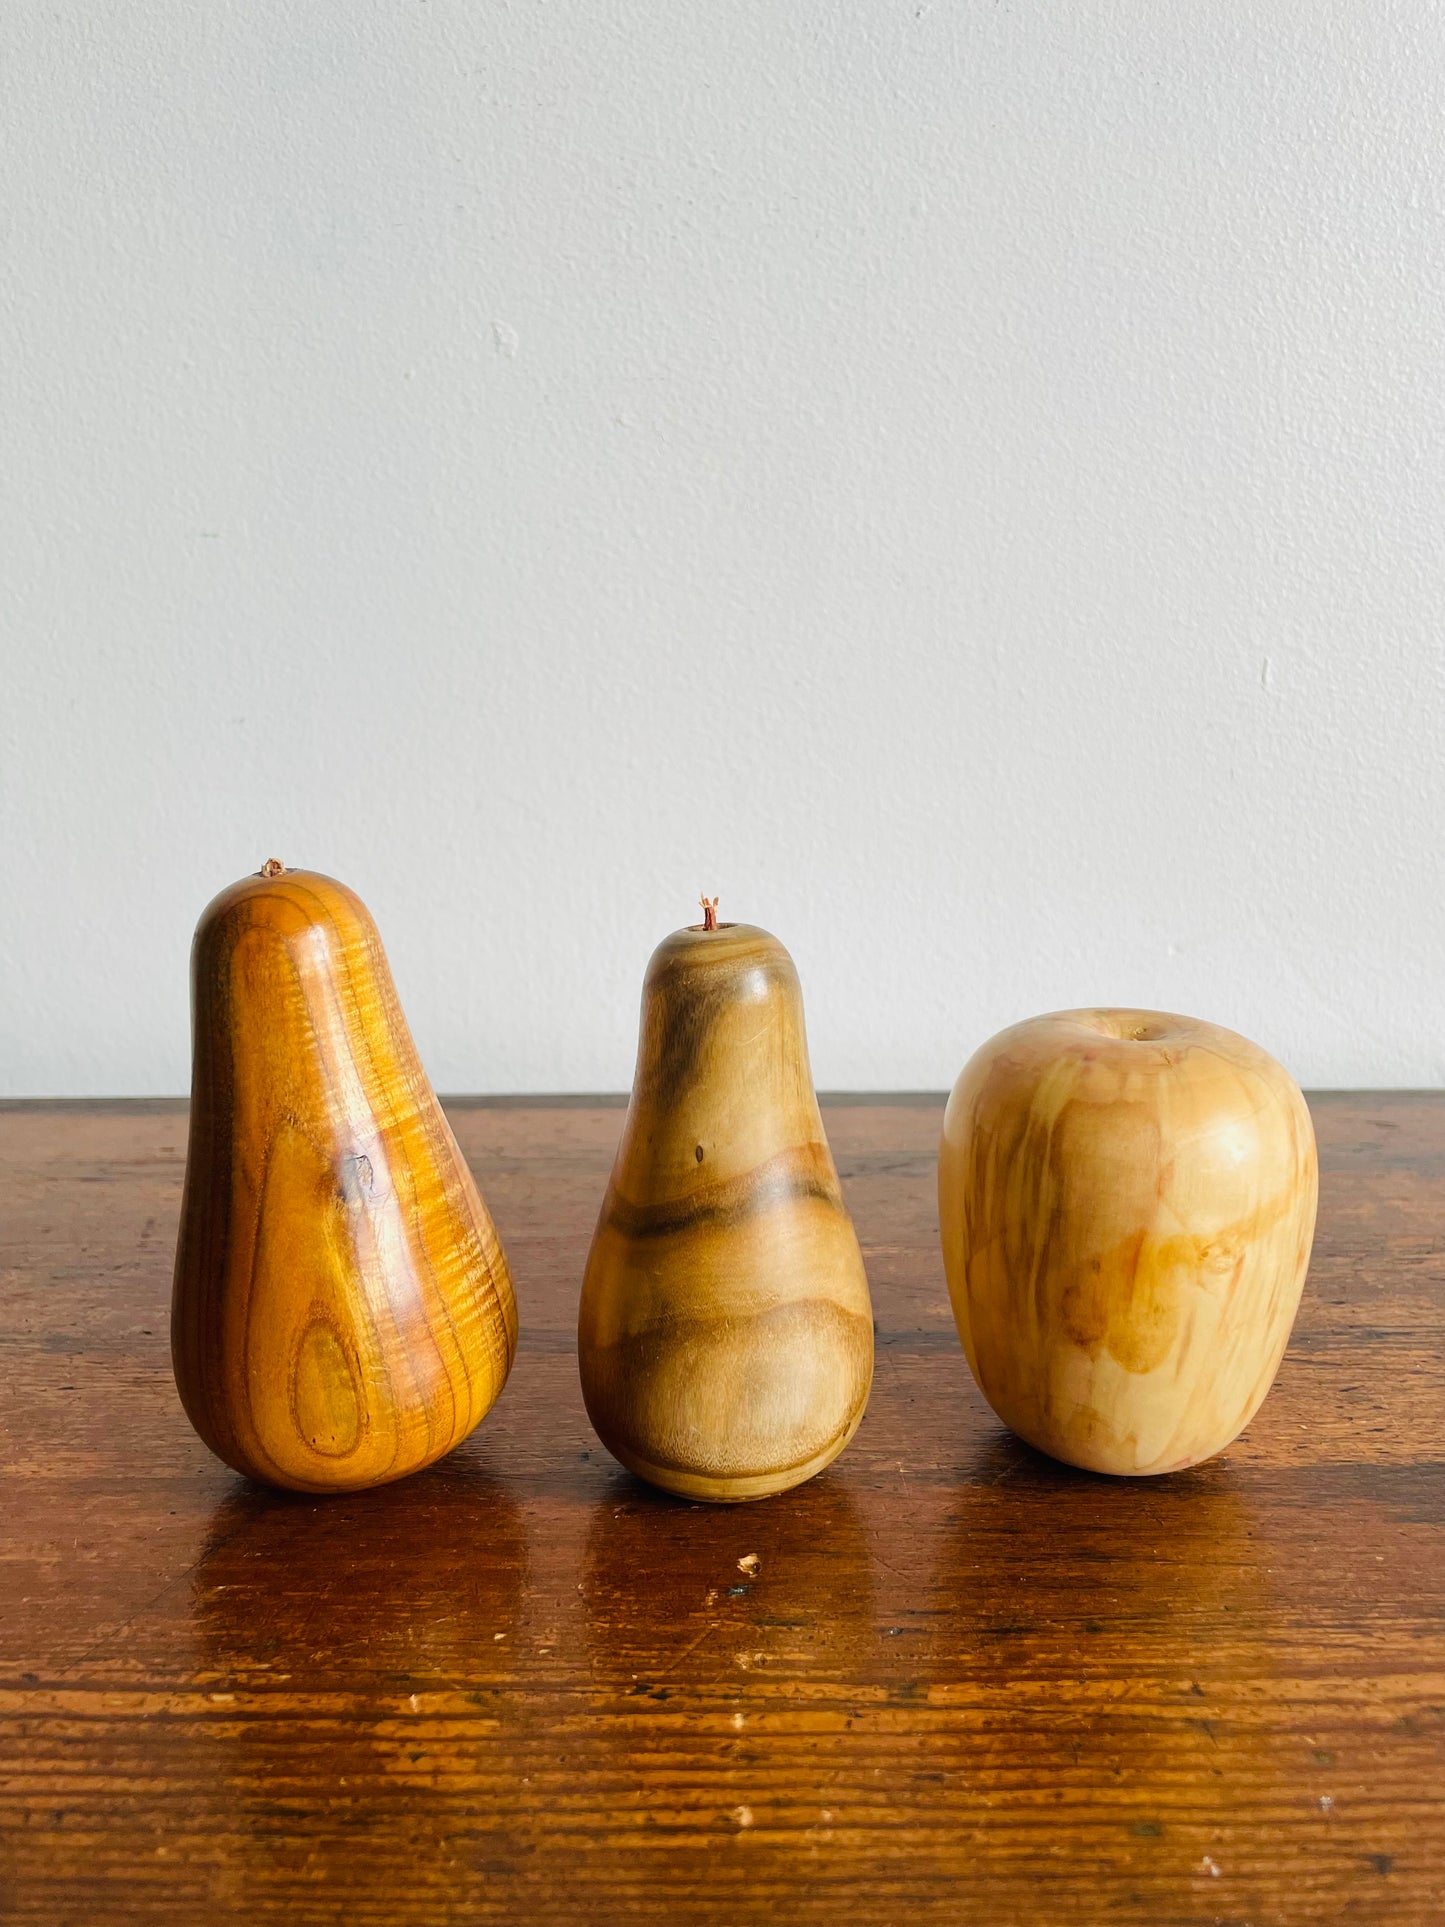 Trio of Smooth Carved Wood Fruit with Marbled Look - Set of 3